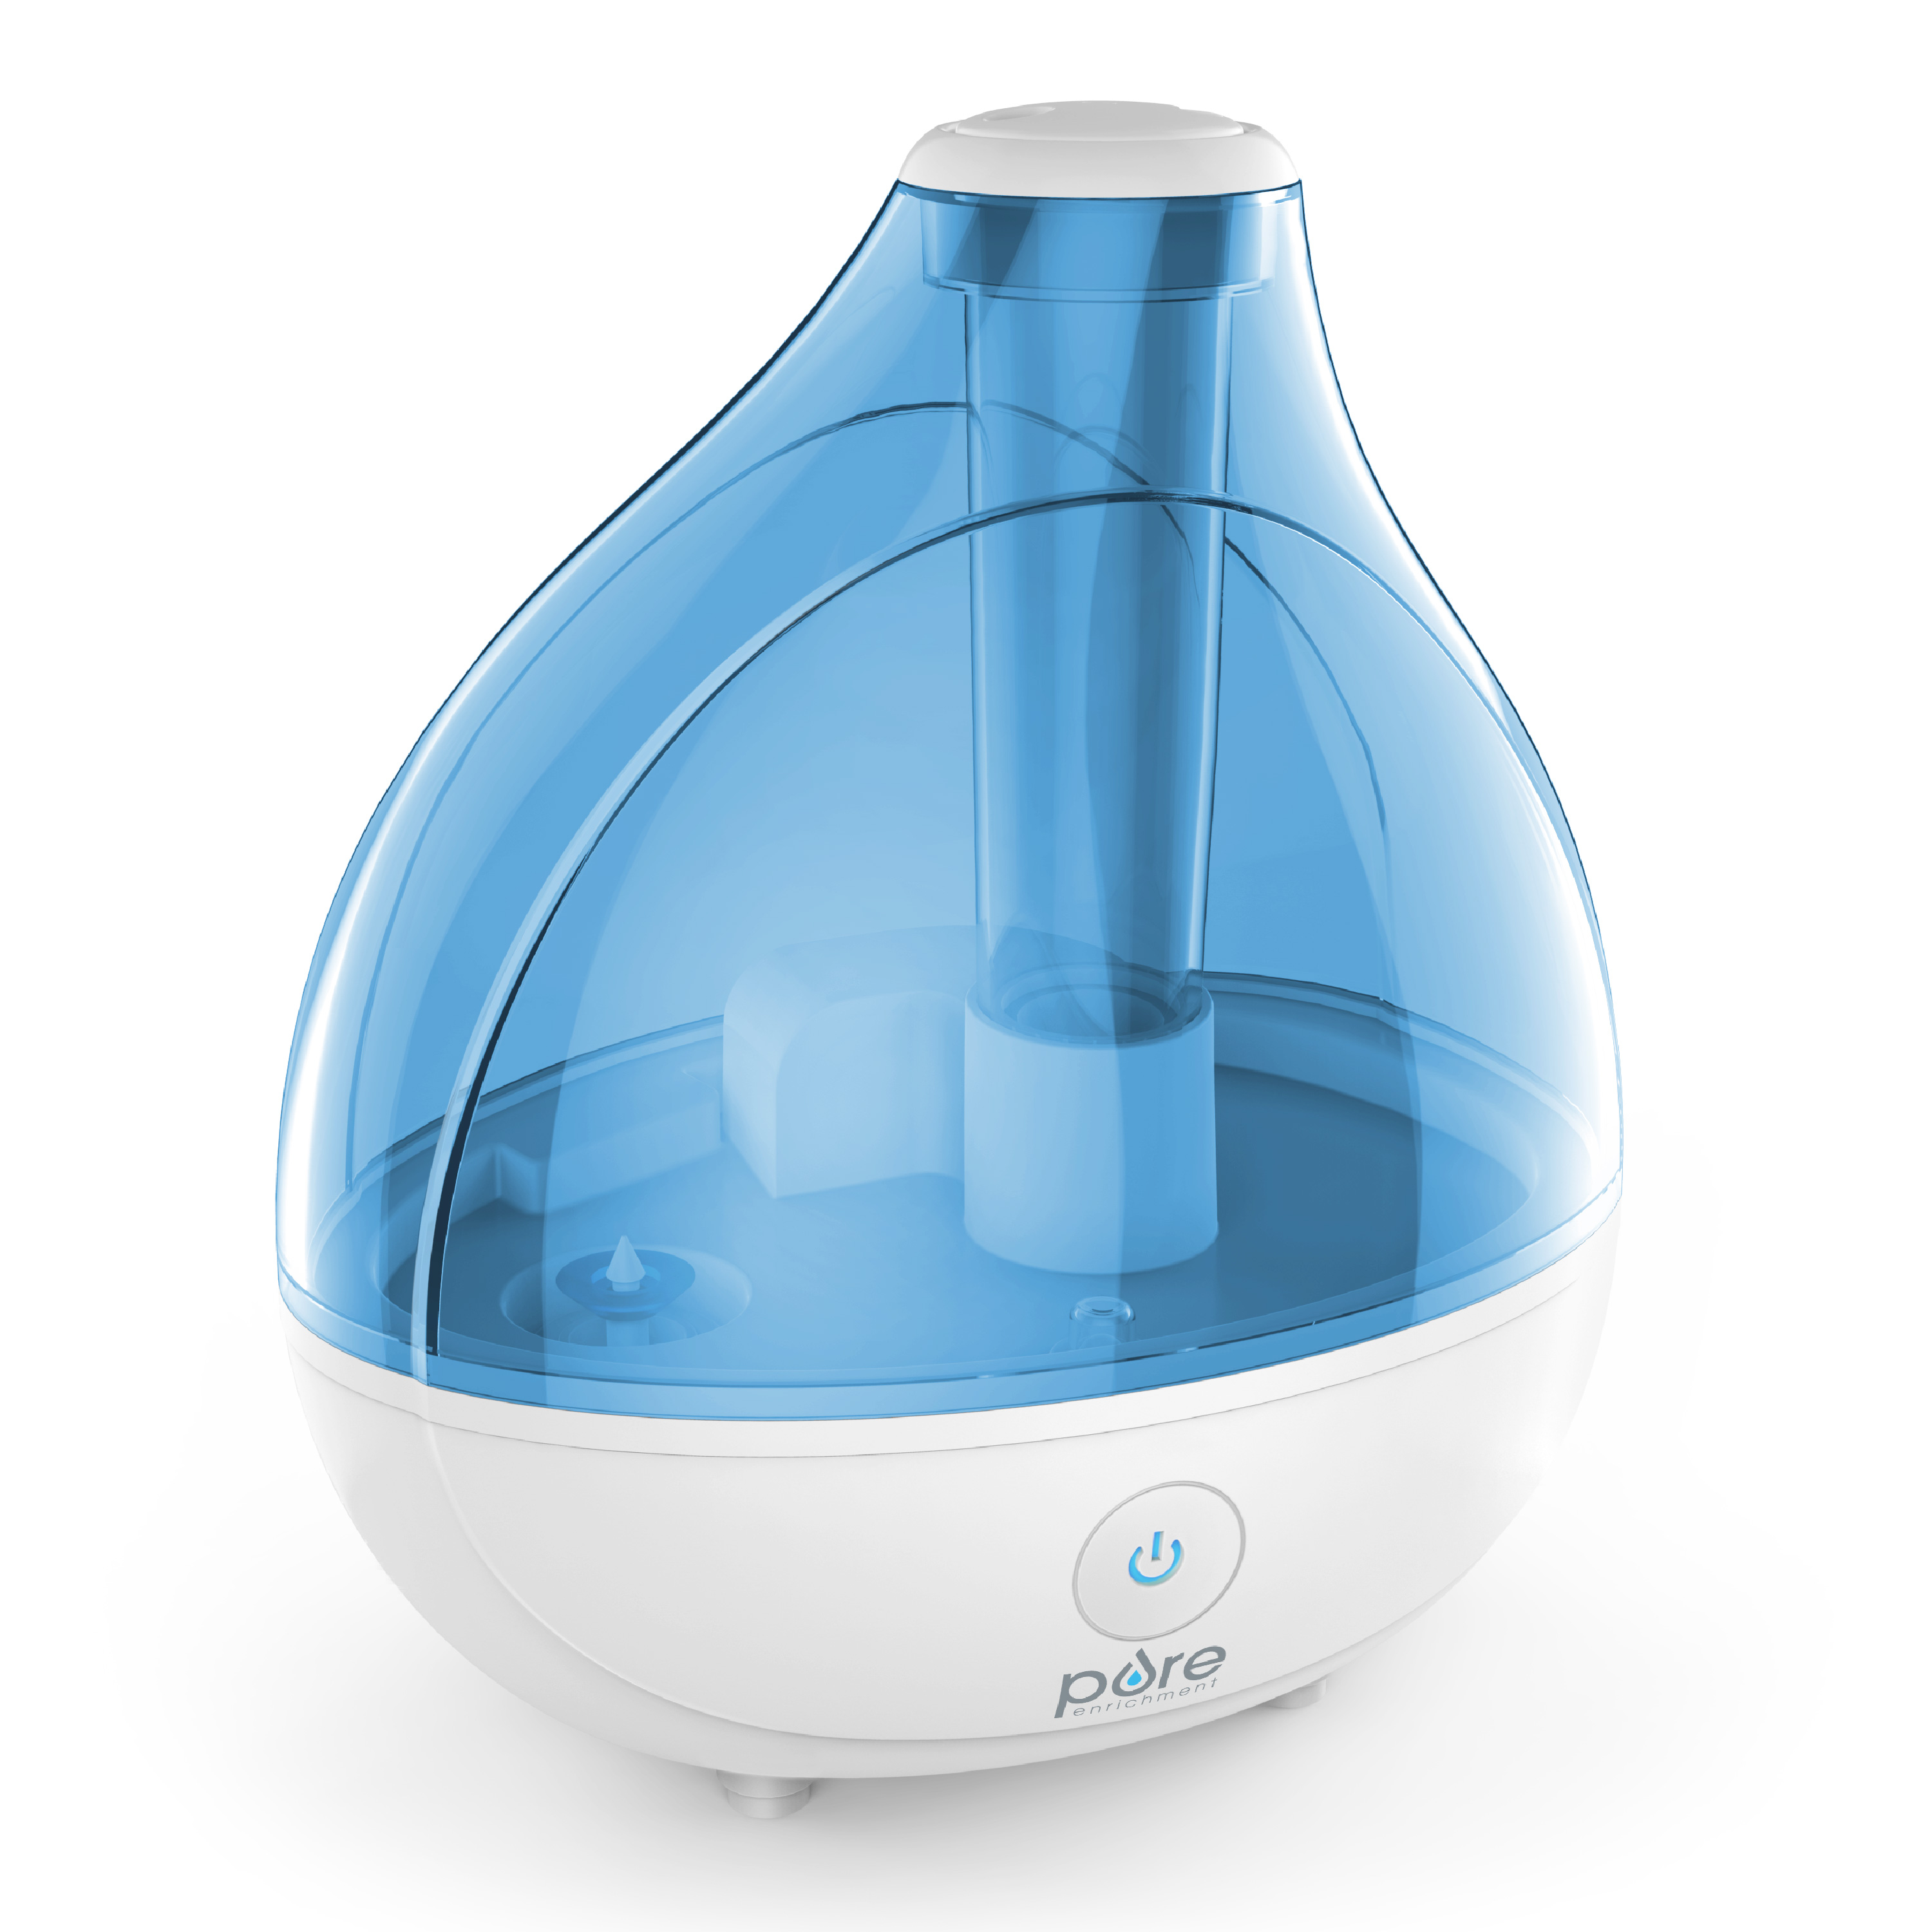 Pure Enrichment MistAire Ultrasonic Cool Mist Humidifier - Quiet Air Humidifier That Lasts Up To 25 Hours, 360° Rotation Nozzle, Auto Shut-Off, Night Light - image 1 of 9